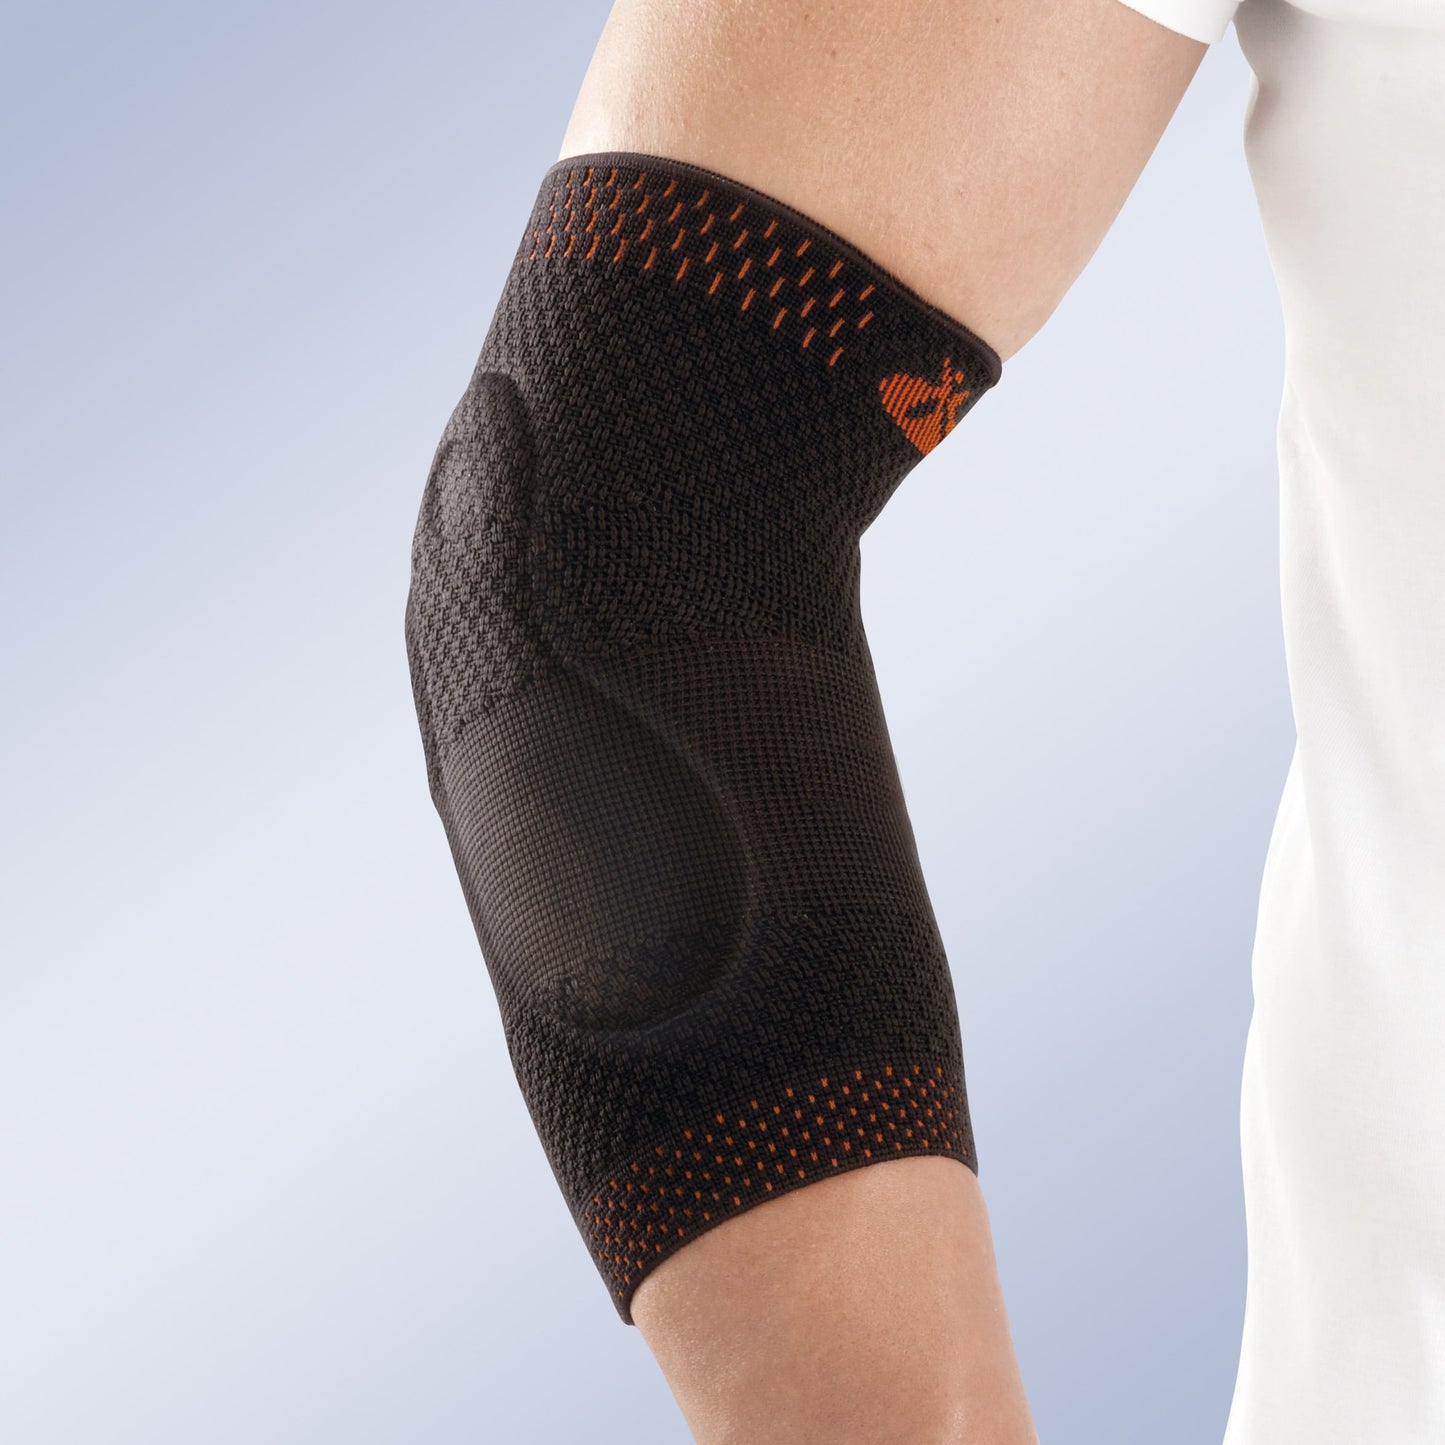 ELASTIC ELBOW SUPPORT WITH VISCOLASTIC PADS